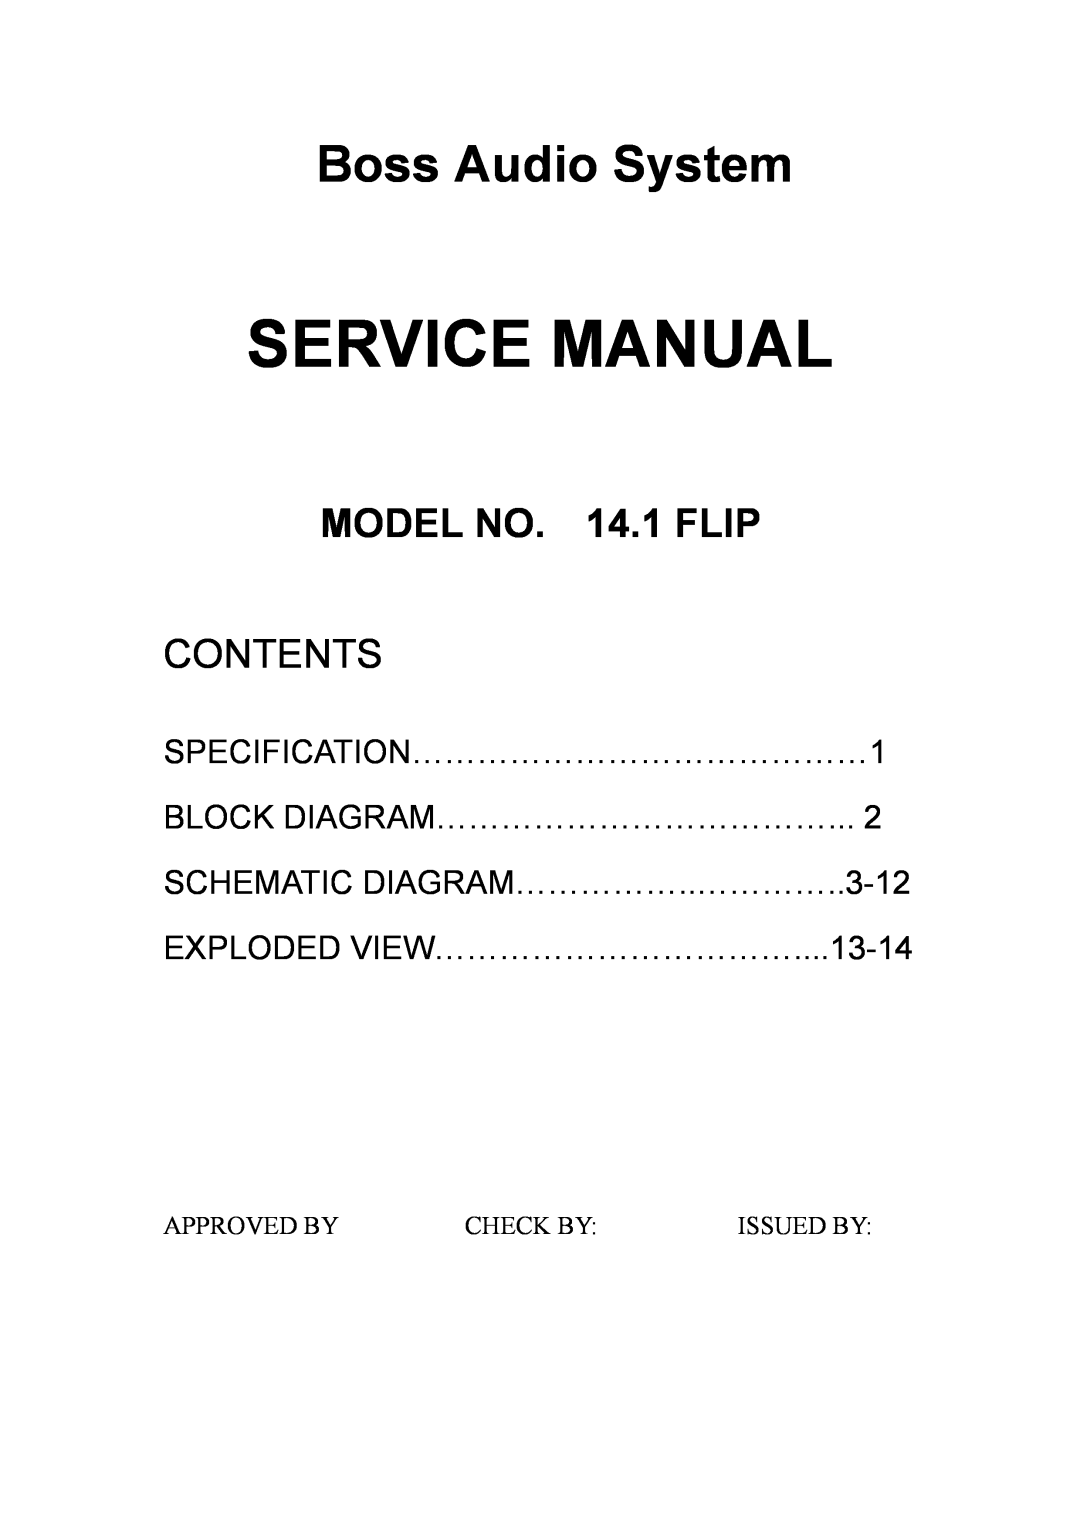 Boss Audio Systems service manual Boss Audio System, MODEL NO. 14.1 FLIP, Contents, SPECIFICATION……………………………………1 